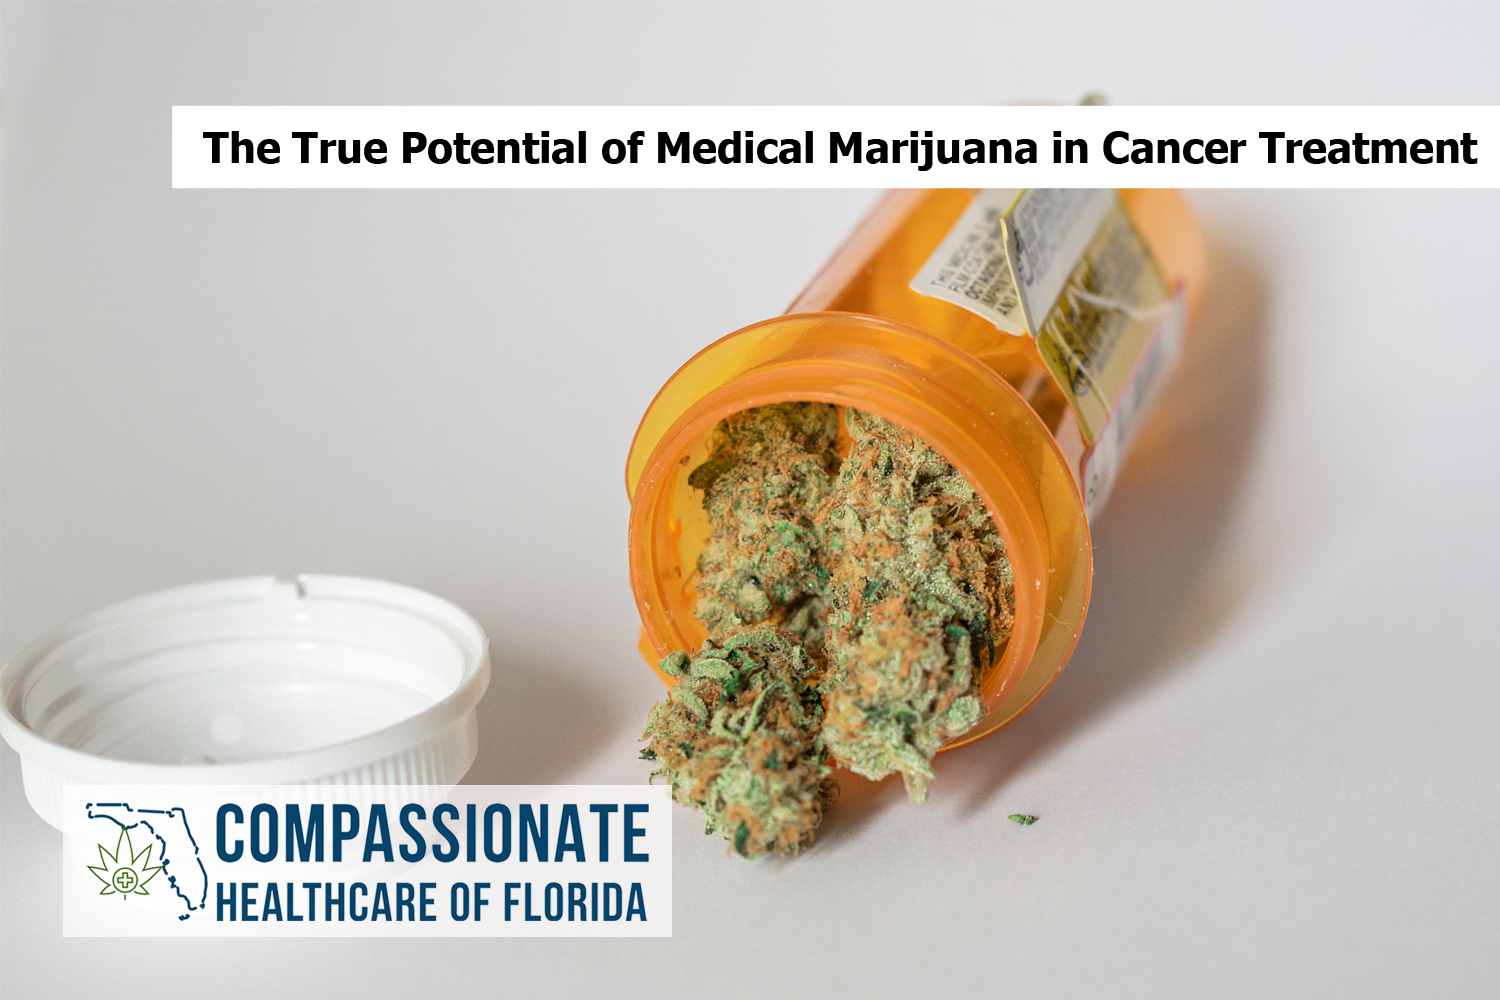 The True Potential of Medical Marijuana in Cancer Treatment